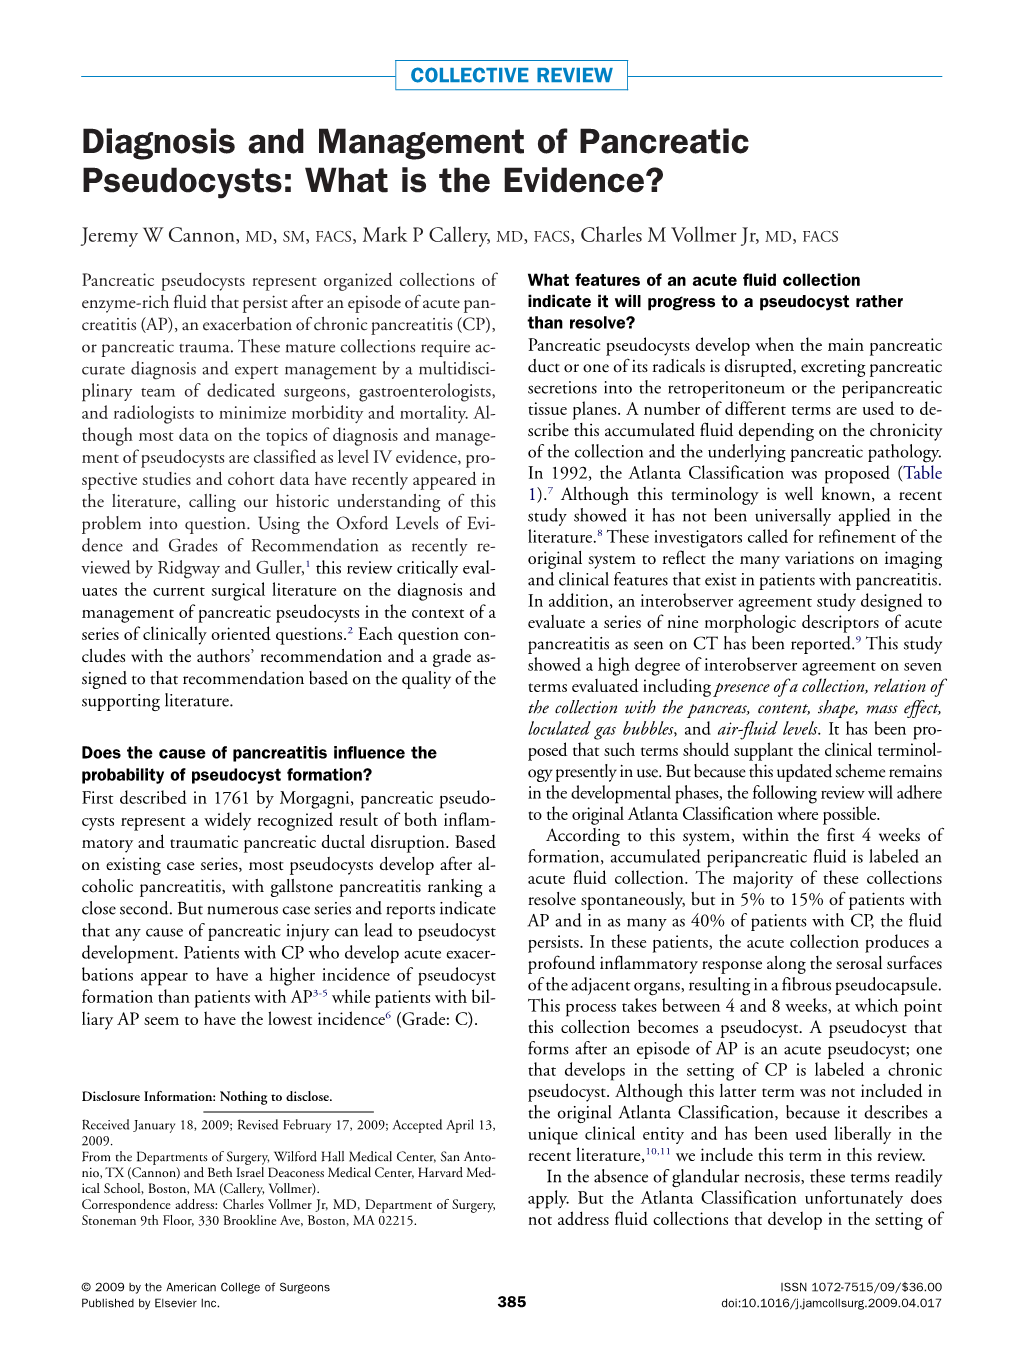 Diagnosis and Management of Pancreatic Pseudocysts: What Is the Evidence?